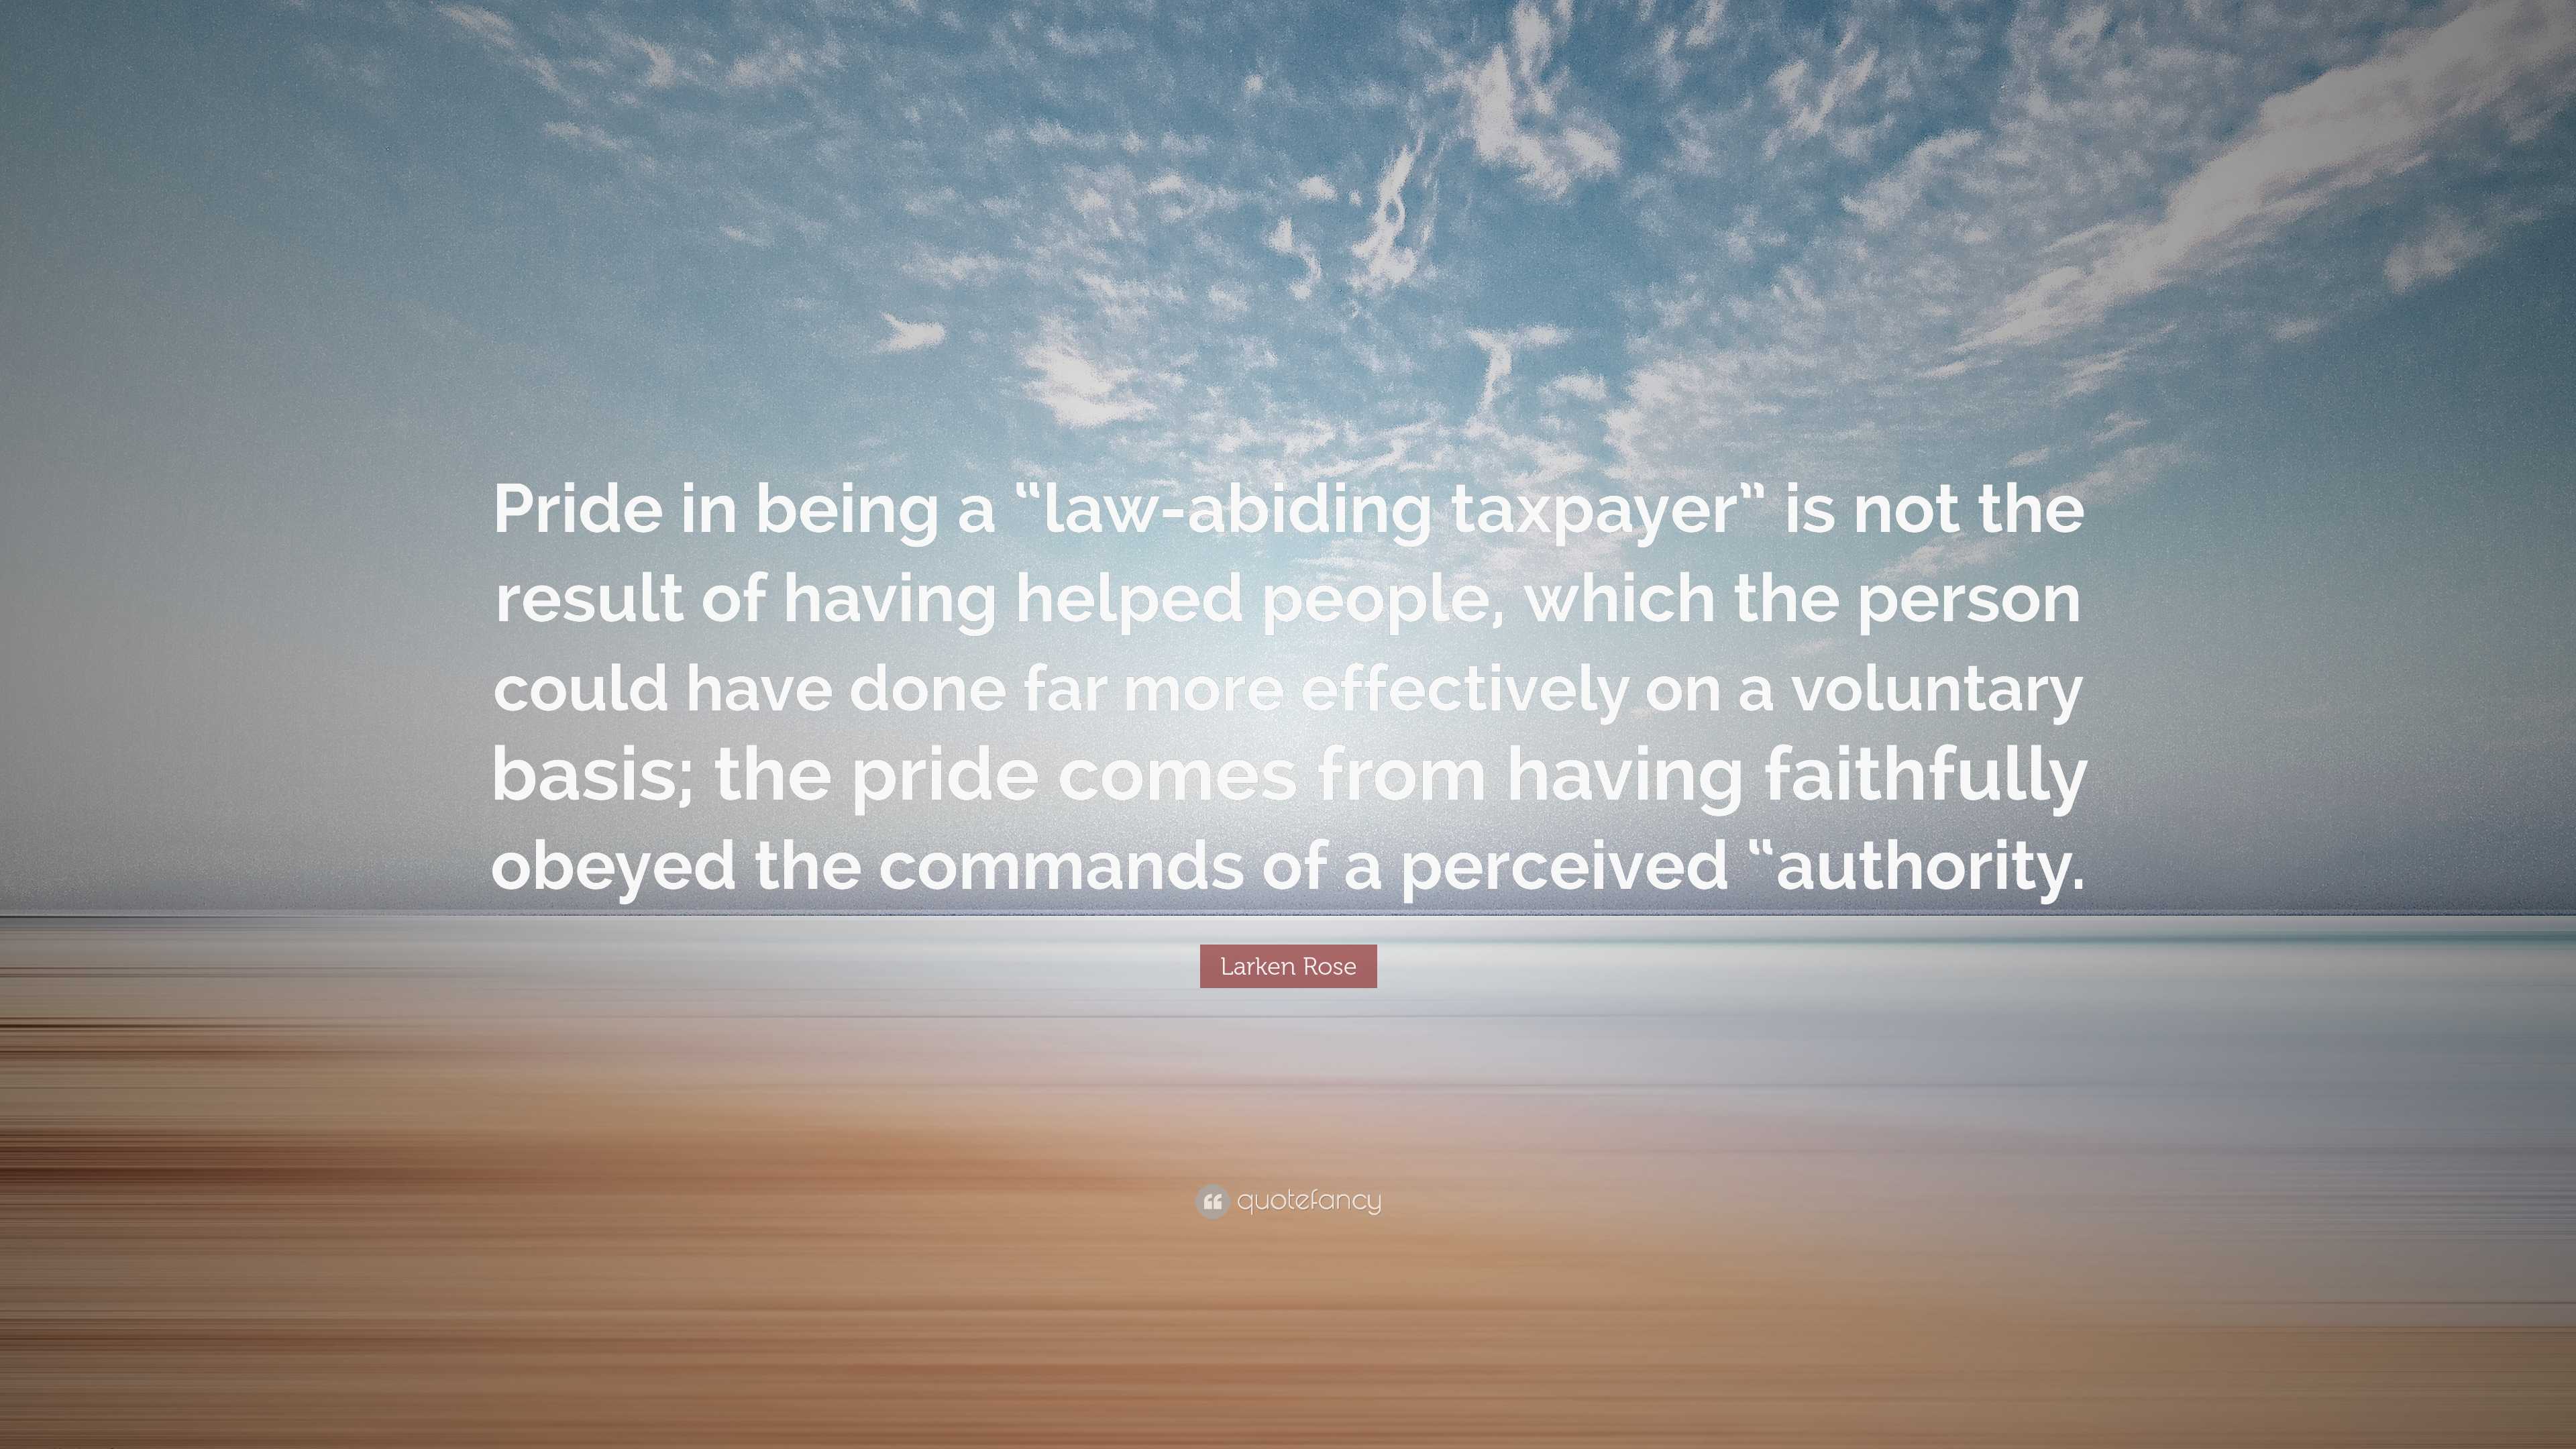 Larken Rose Quote: “Pride in being a “law-abiding taxpayer” is not